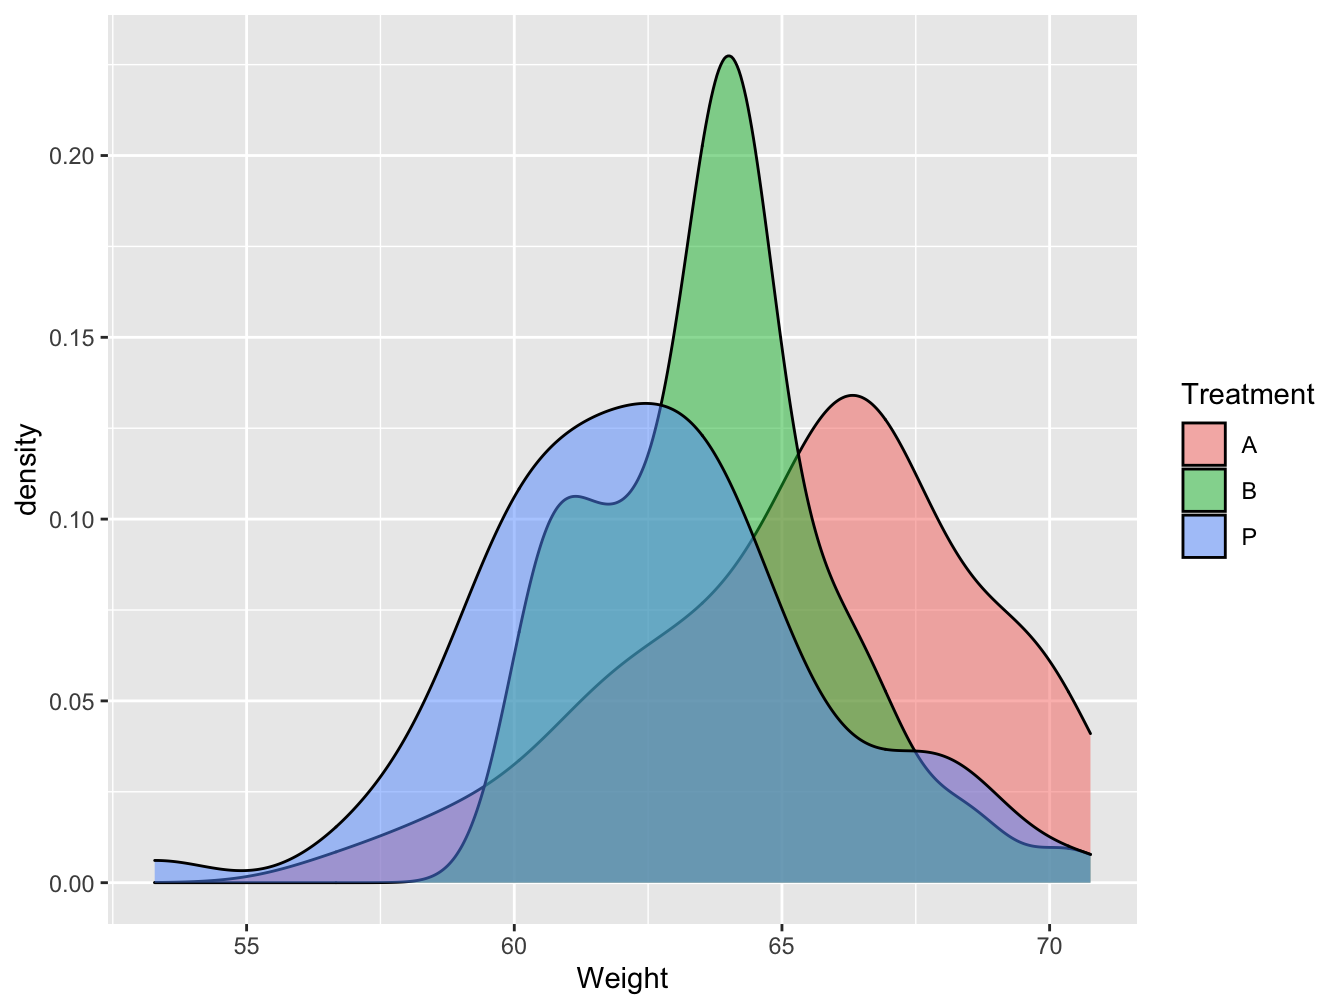 Density plots of the effect of different treatments on gain weight